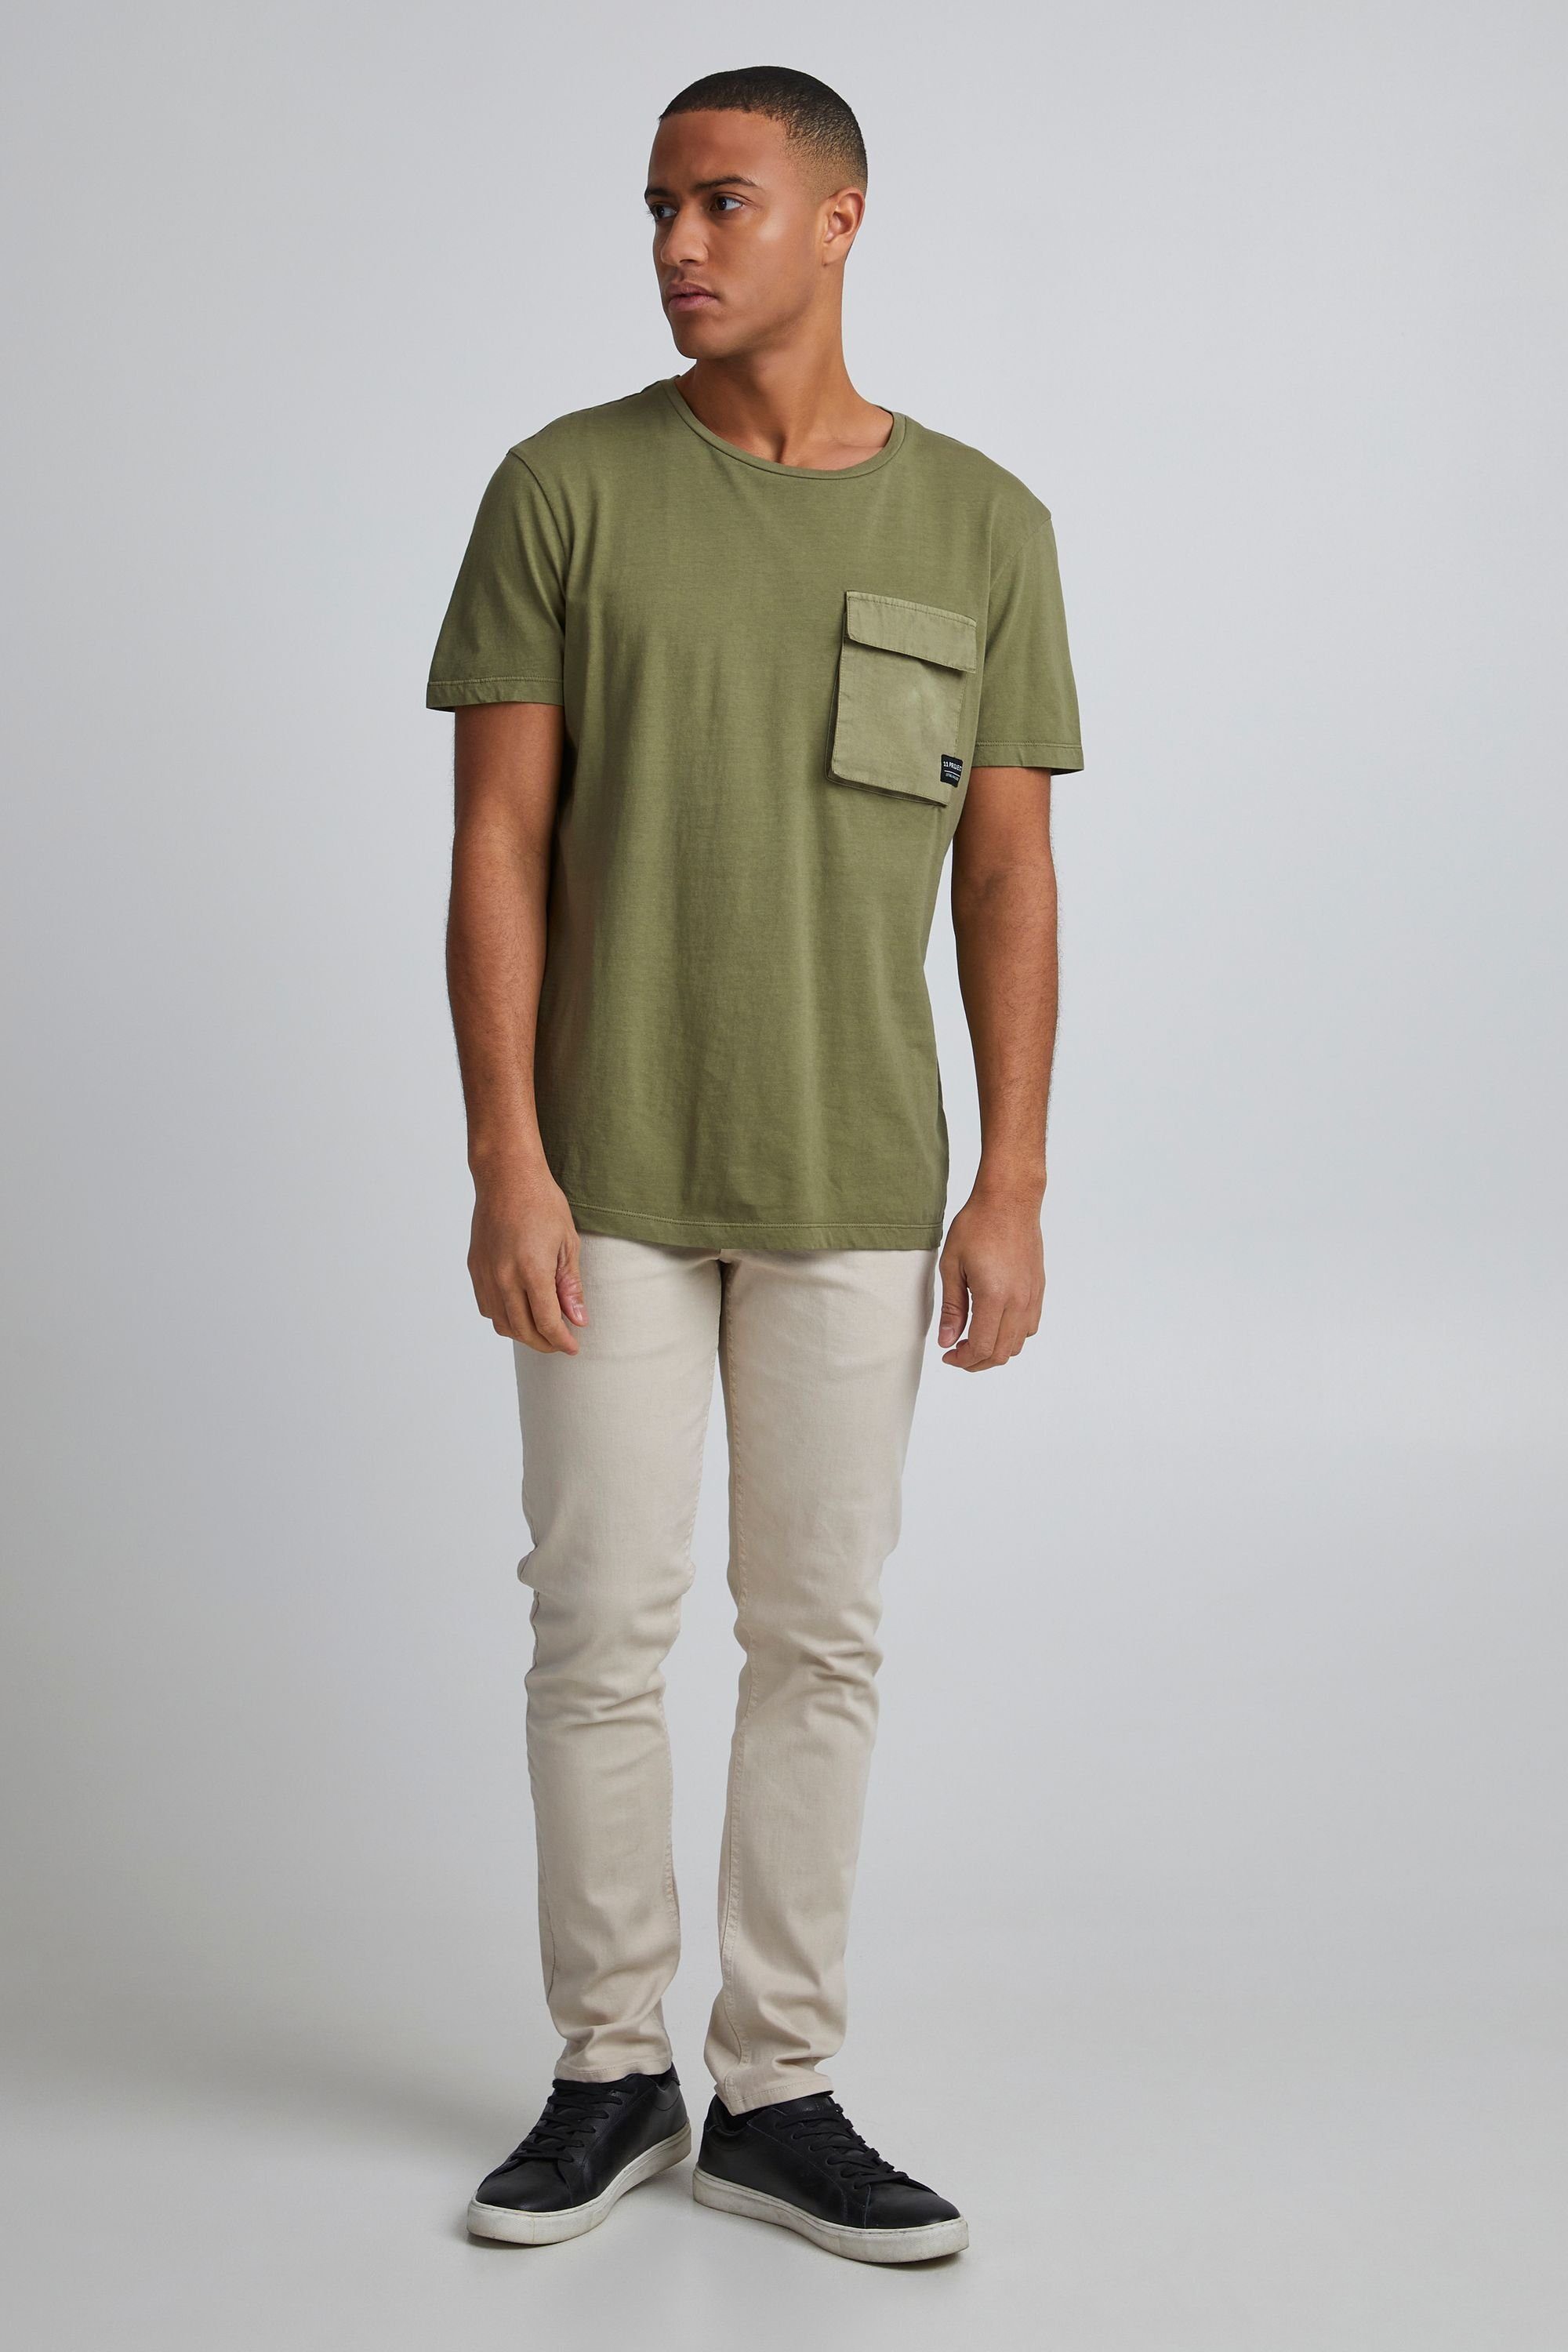 Project 11 Loden Green T-Shirt Project PRMads 11